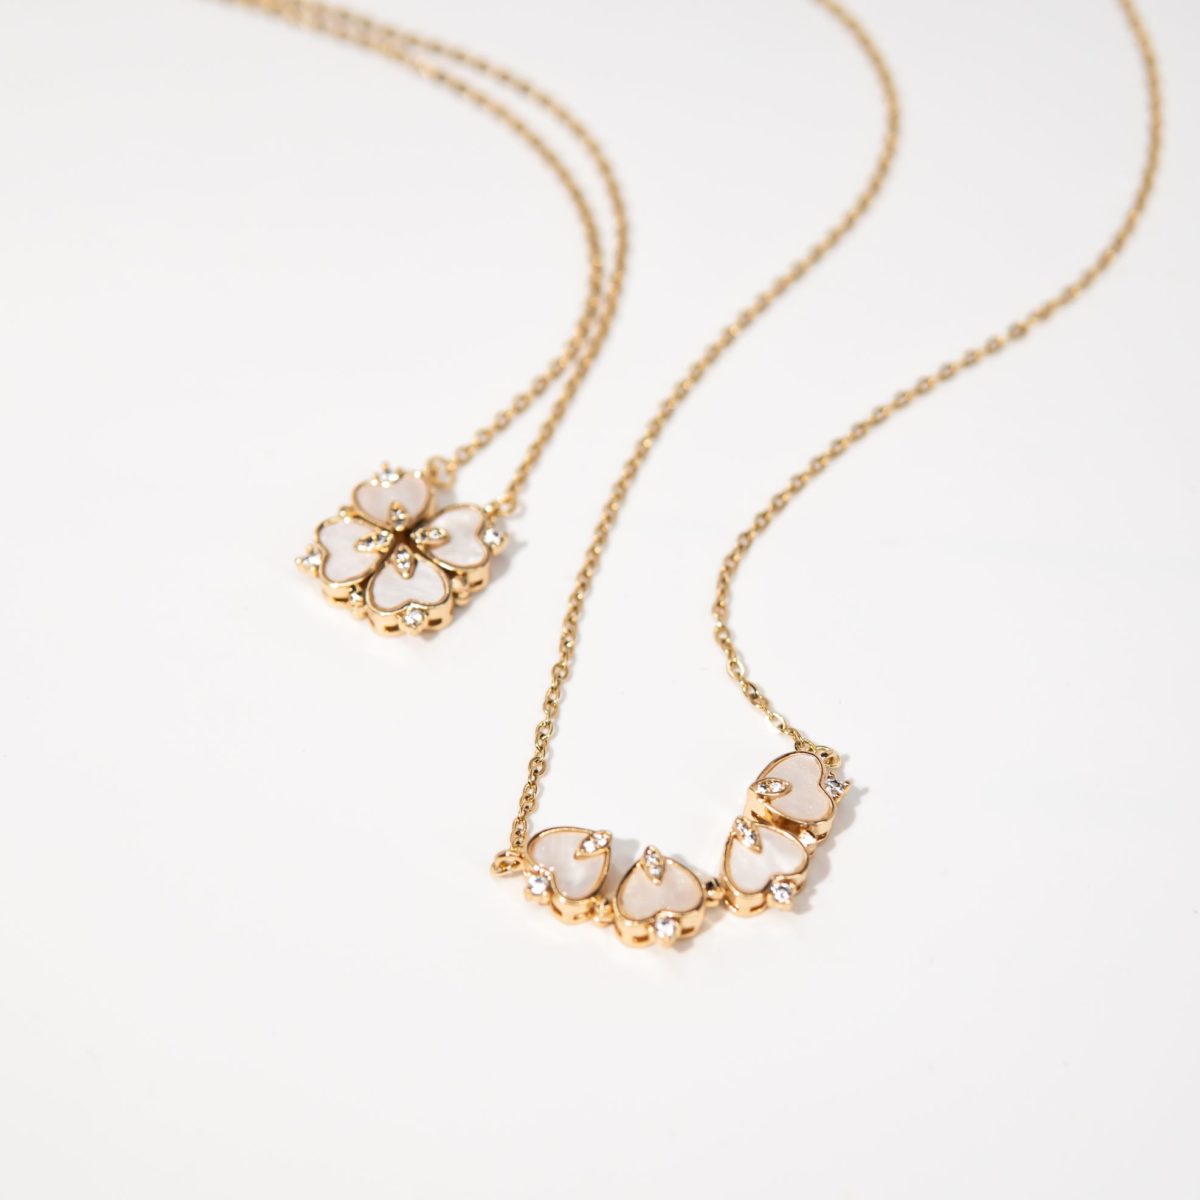 https://m.clubbella.co/product/clover-two-way-necklace/ Clover two way necklace (4)